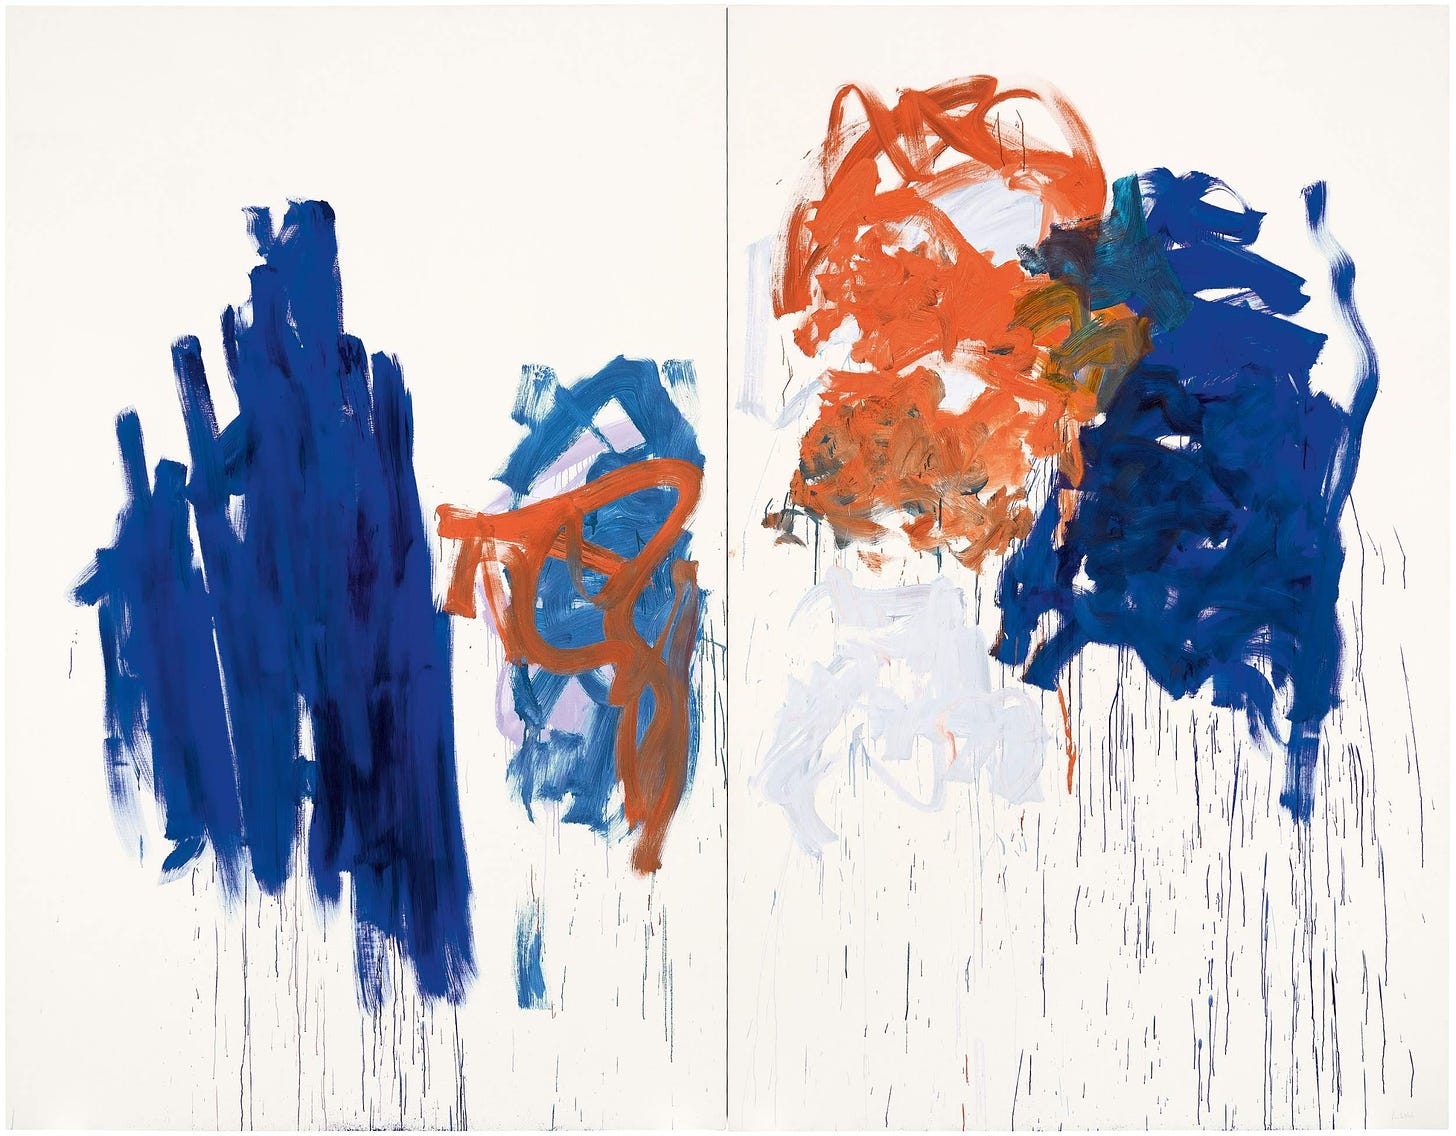 Merci, 1992, abstract painting on 2 canvases by artist Joan Mitchell